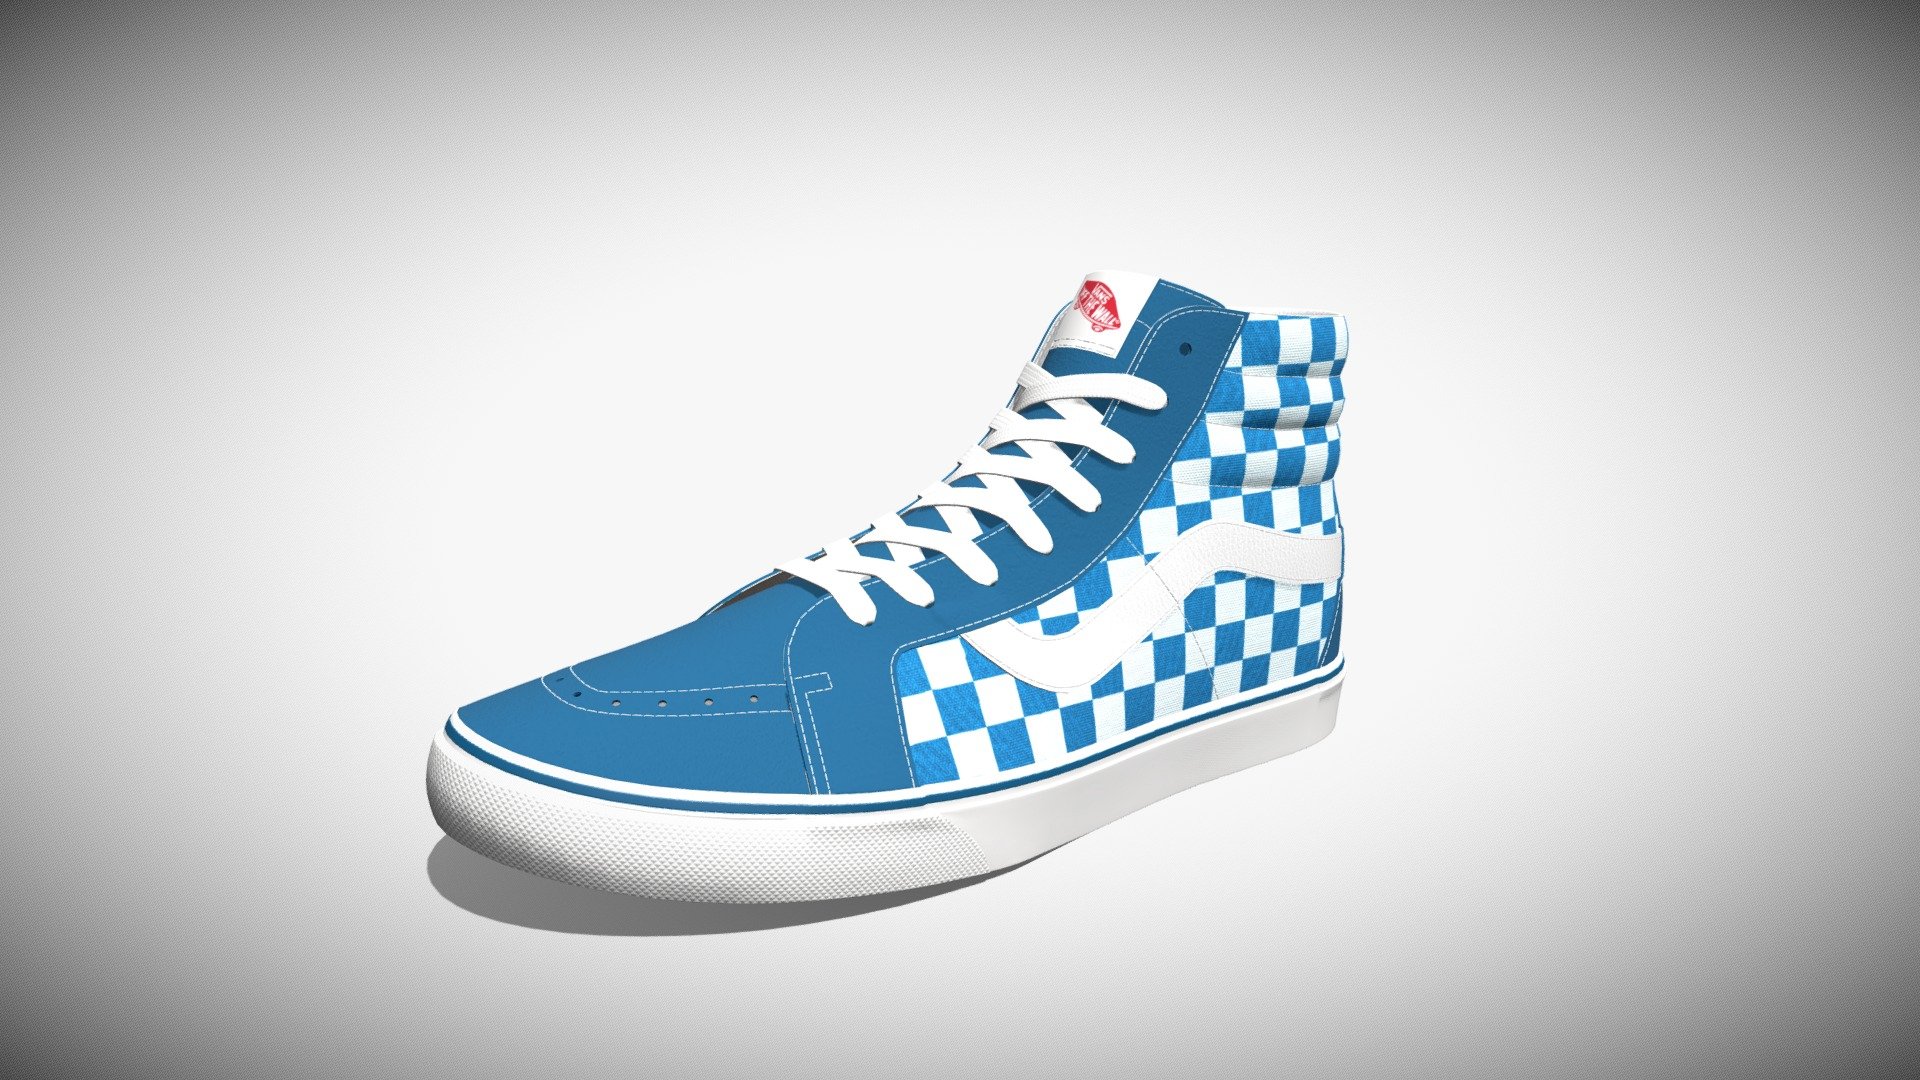 Detailed 3D model of a pair of Checker Blue Vans Sk8- Hi Reissue sneakers, modeled in Cinema 4D. The model was created using approximate real world dimensions.

The model has 373,010 polys and 394,182 vertices.

An additional file has been provided containing the original Cinema 4D project file with both standard and v-ray materials, textures and other 3d format such as 3ds, fbx and obj. These files contain both the left and right pair of the shoes 3d model